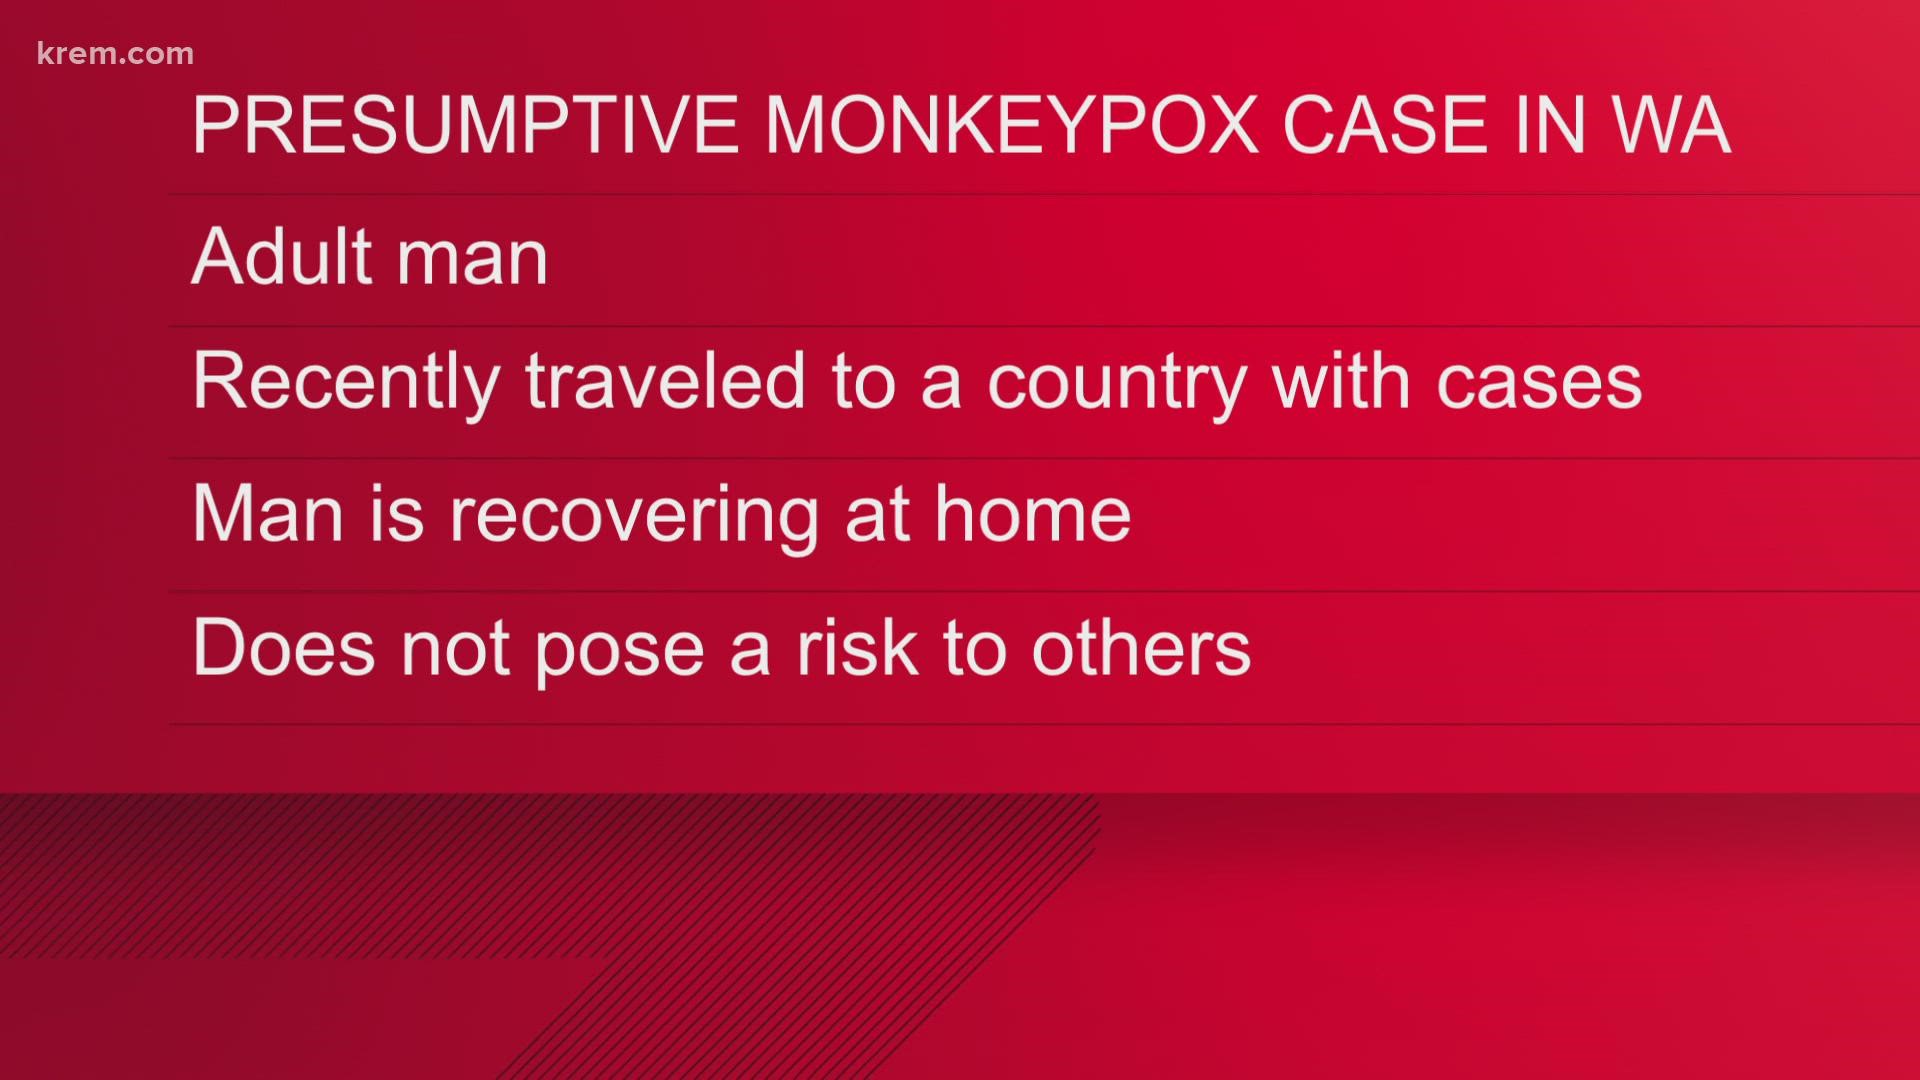 The case is an adult male who recently traveled internationally to a country that reported monkeypox cases recently.